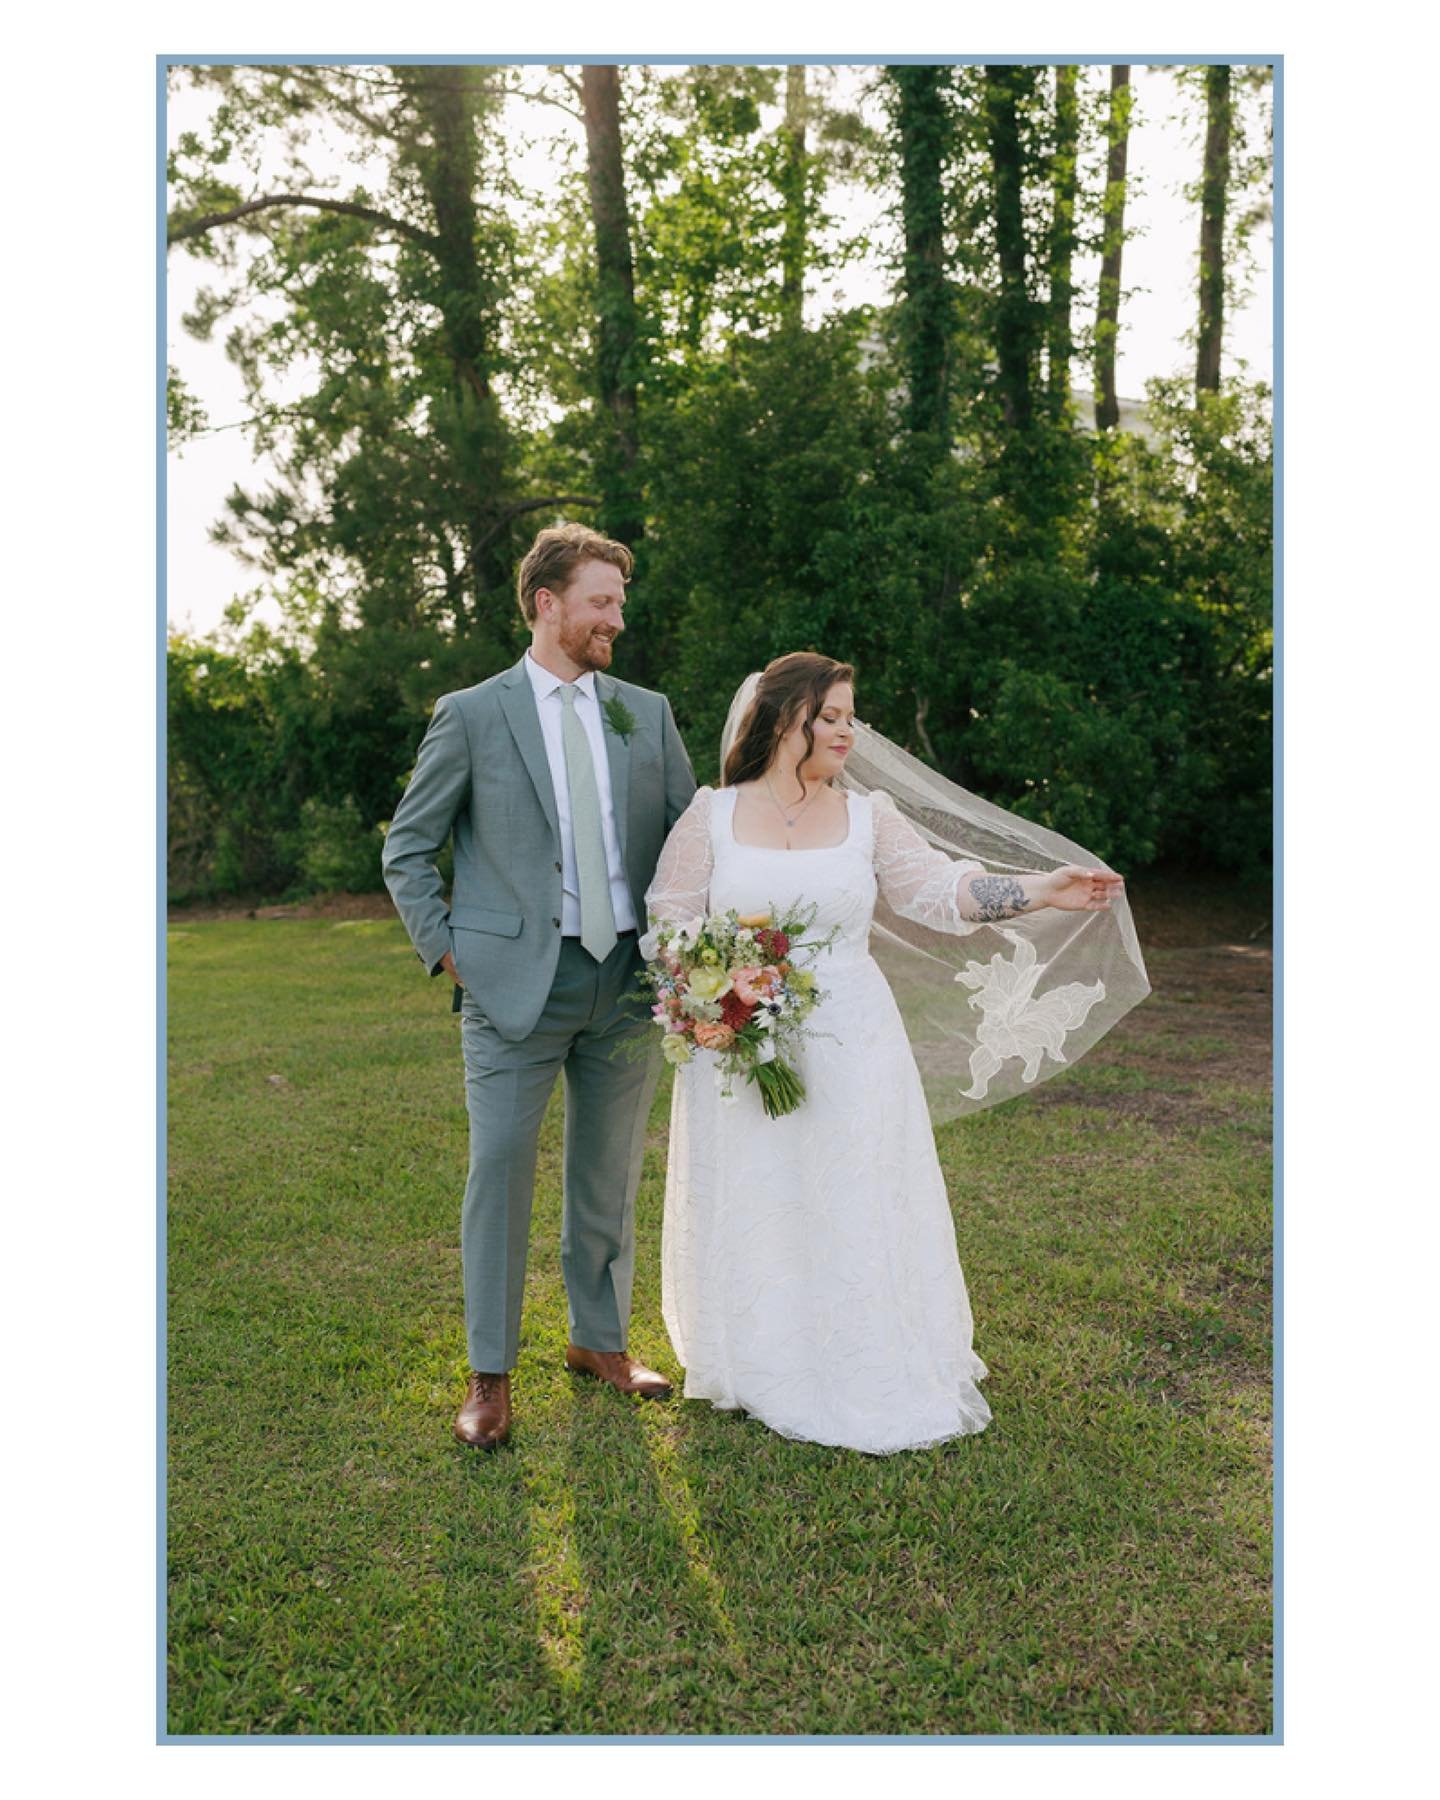 Emily + Patrick 🤍 We will never forget getting to capture the wedding of the true southern &ldquo;Royal Family&rdquo; 😉🥤Emily&rsquo;s great great grandfather invented Cheerwine so they served cold bottles to their guests! It was such a beautiful d